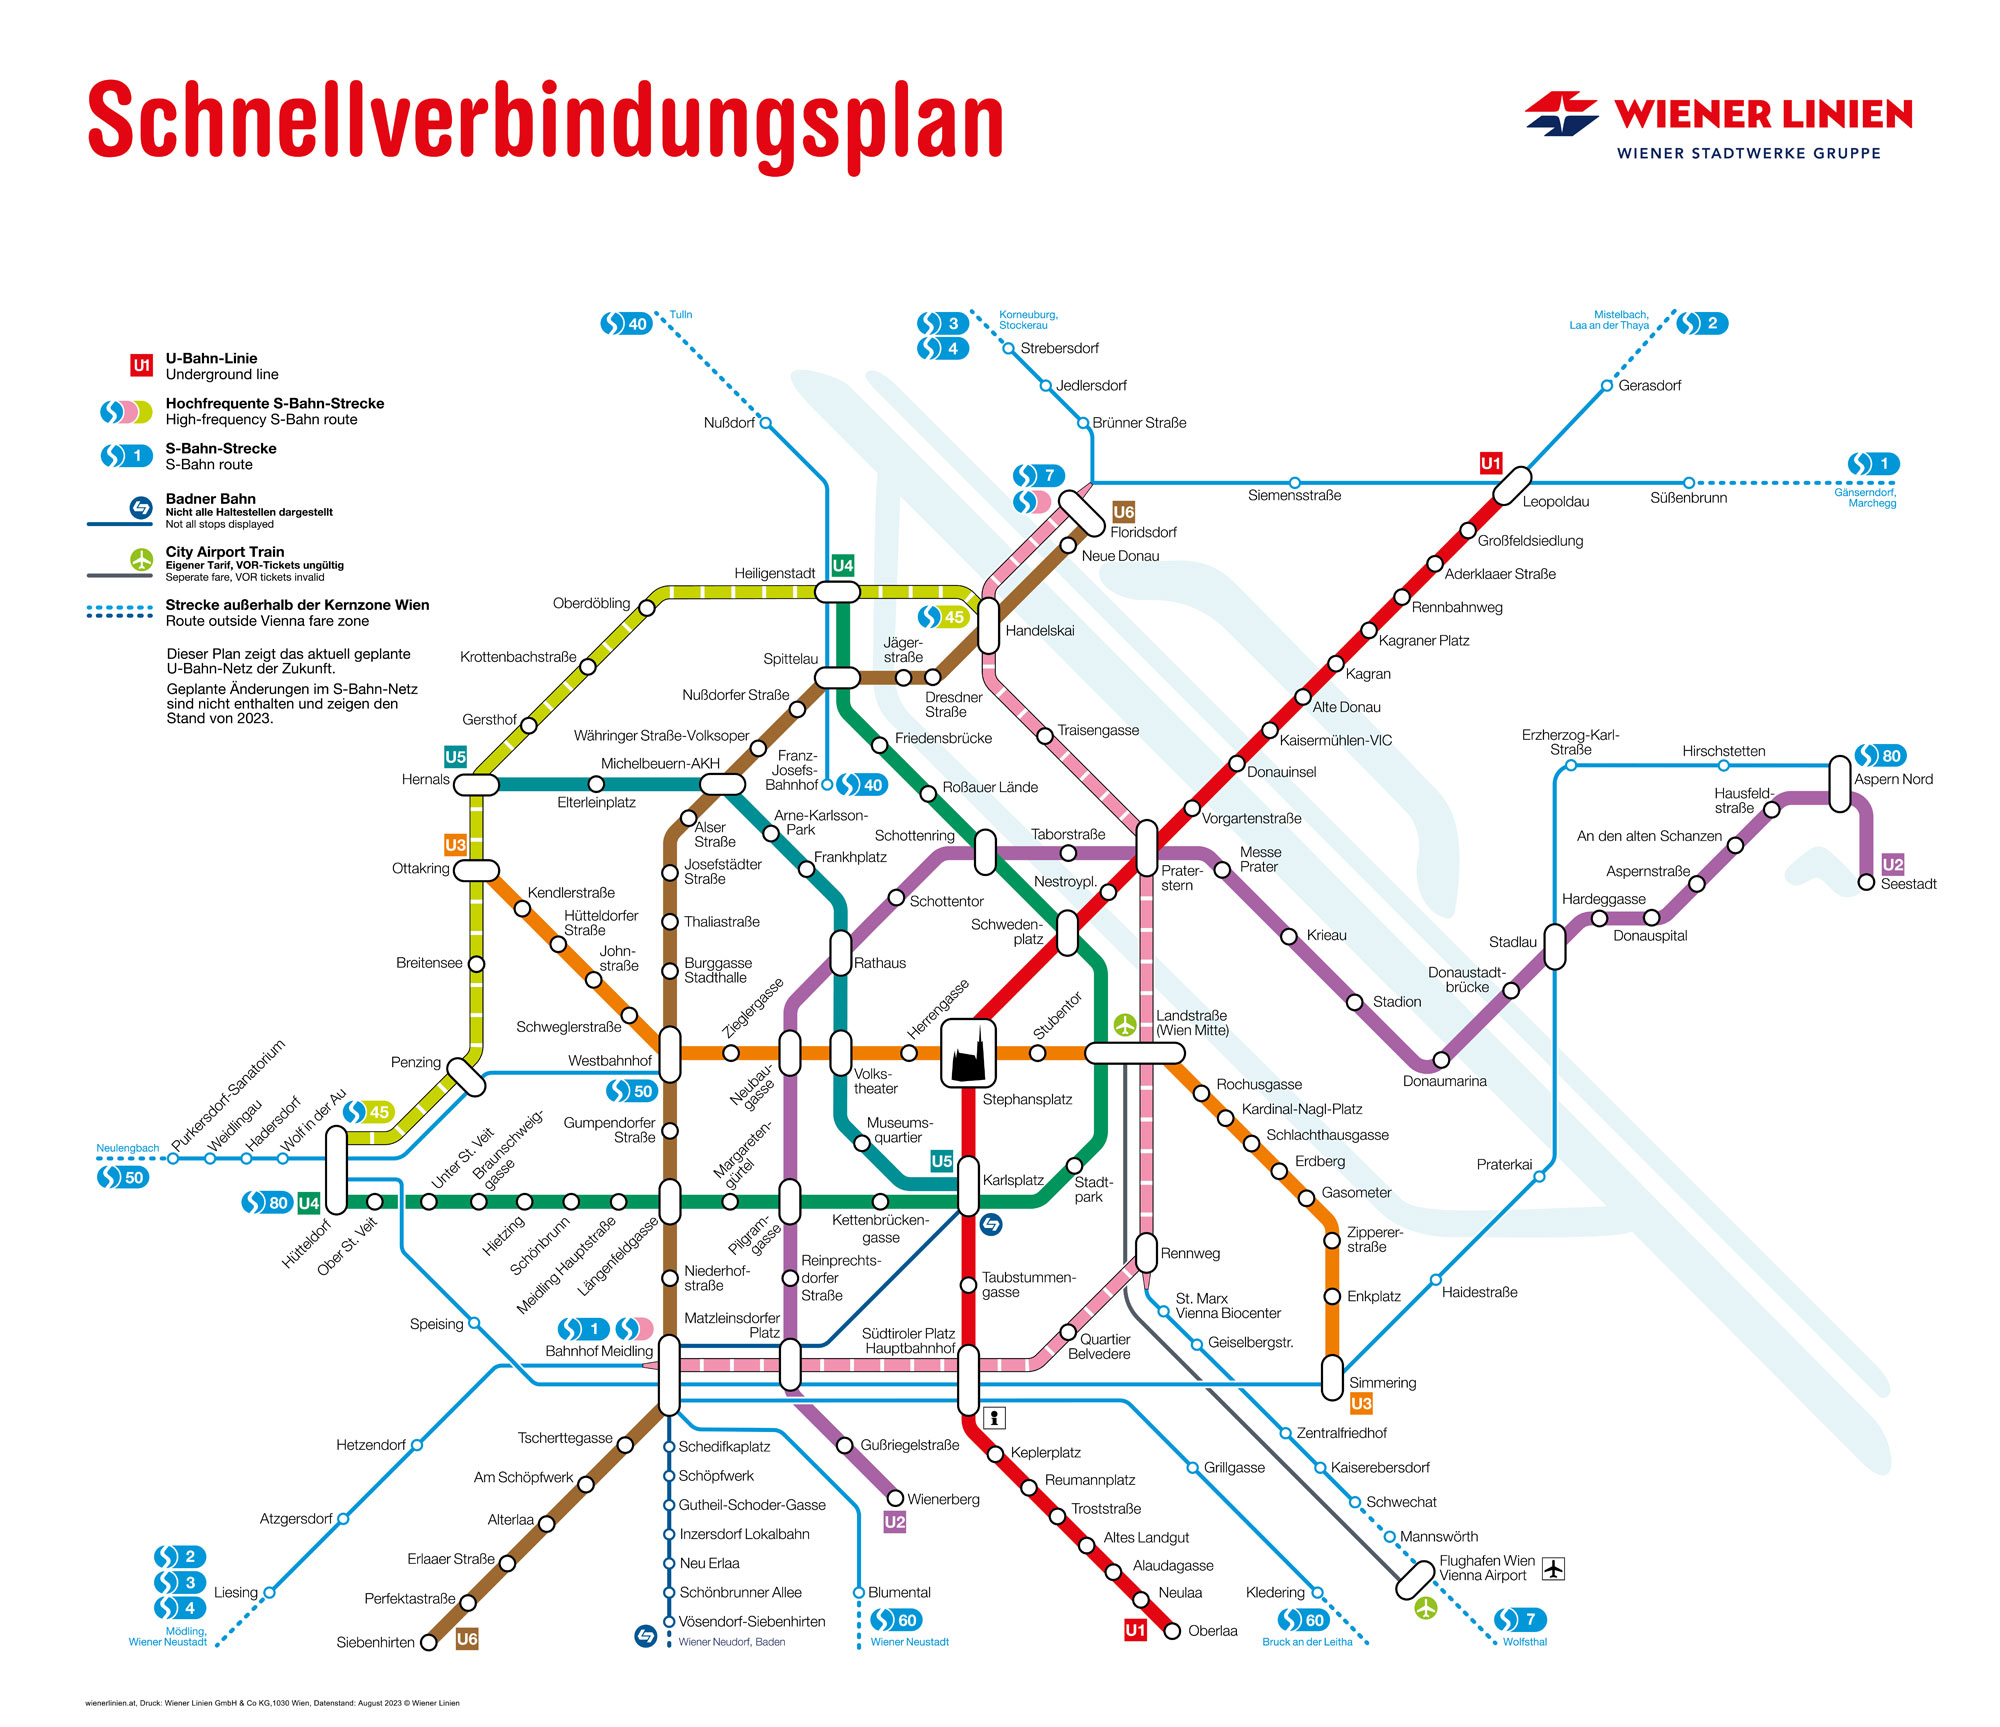 Schnellverbindungen is "Zipping". The U-Bahn map that we all know and love.